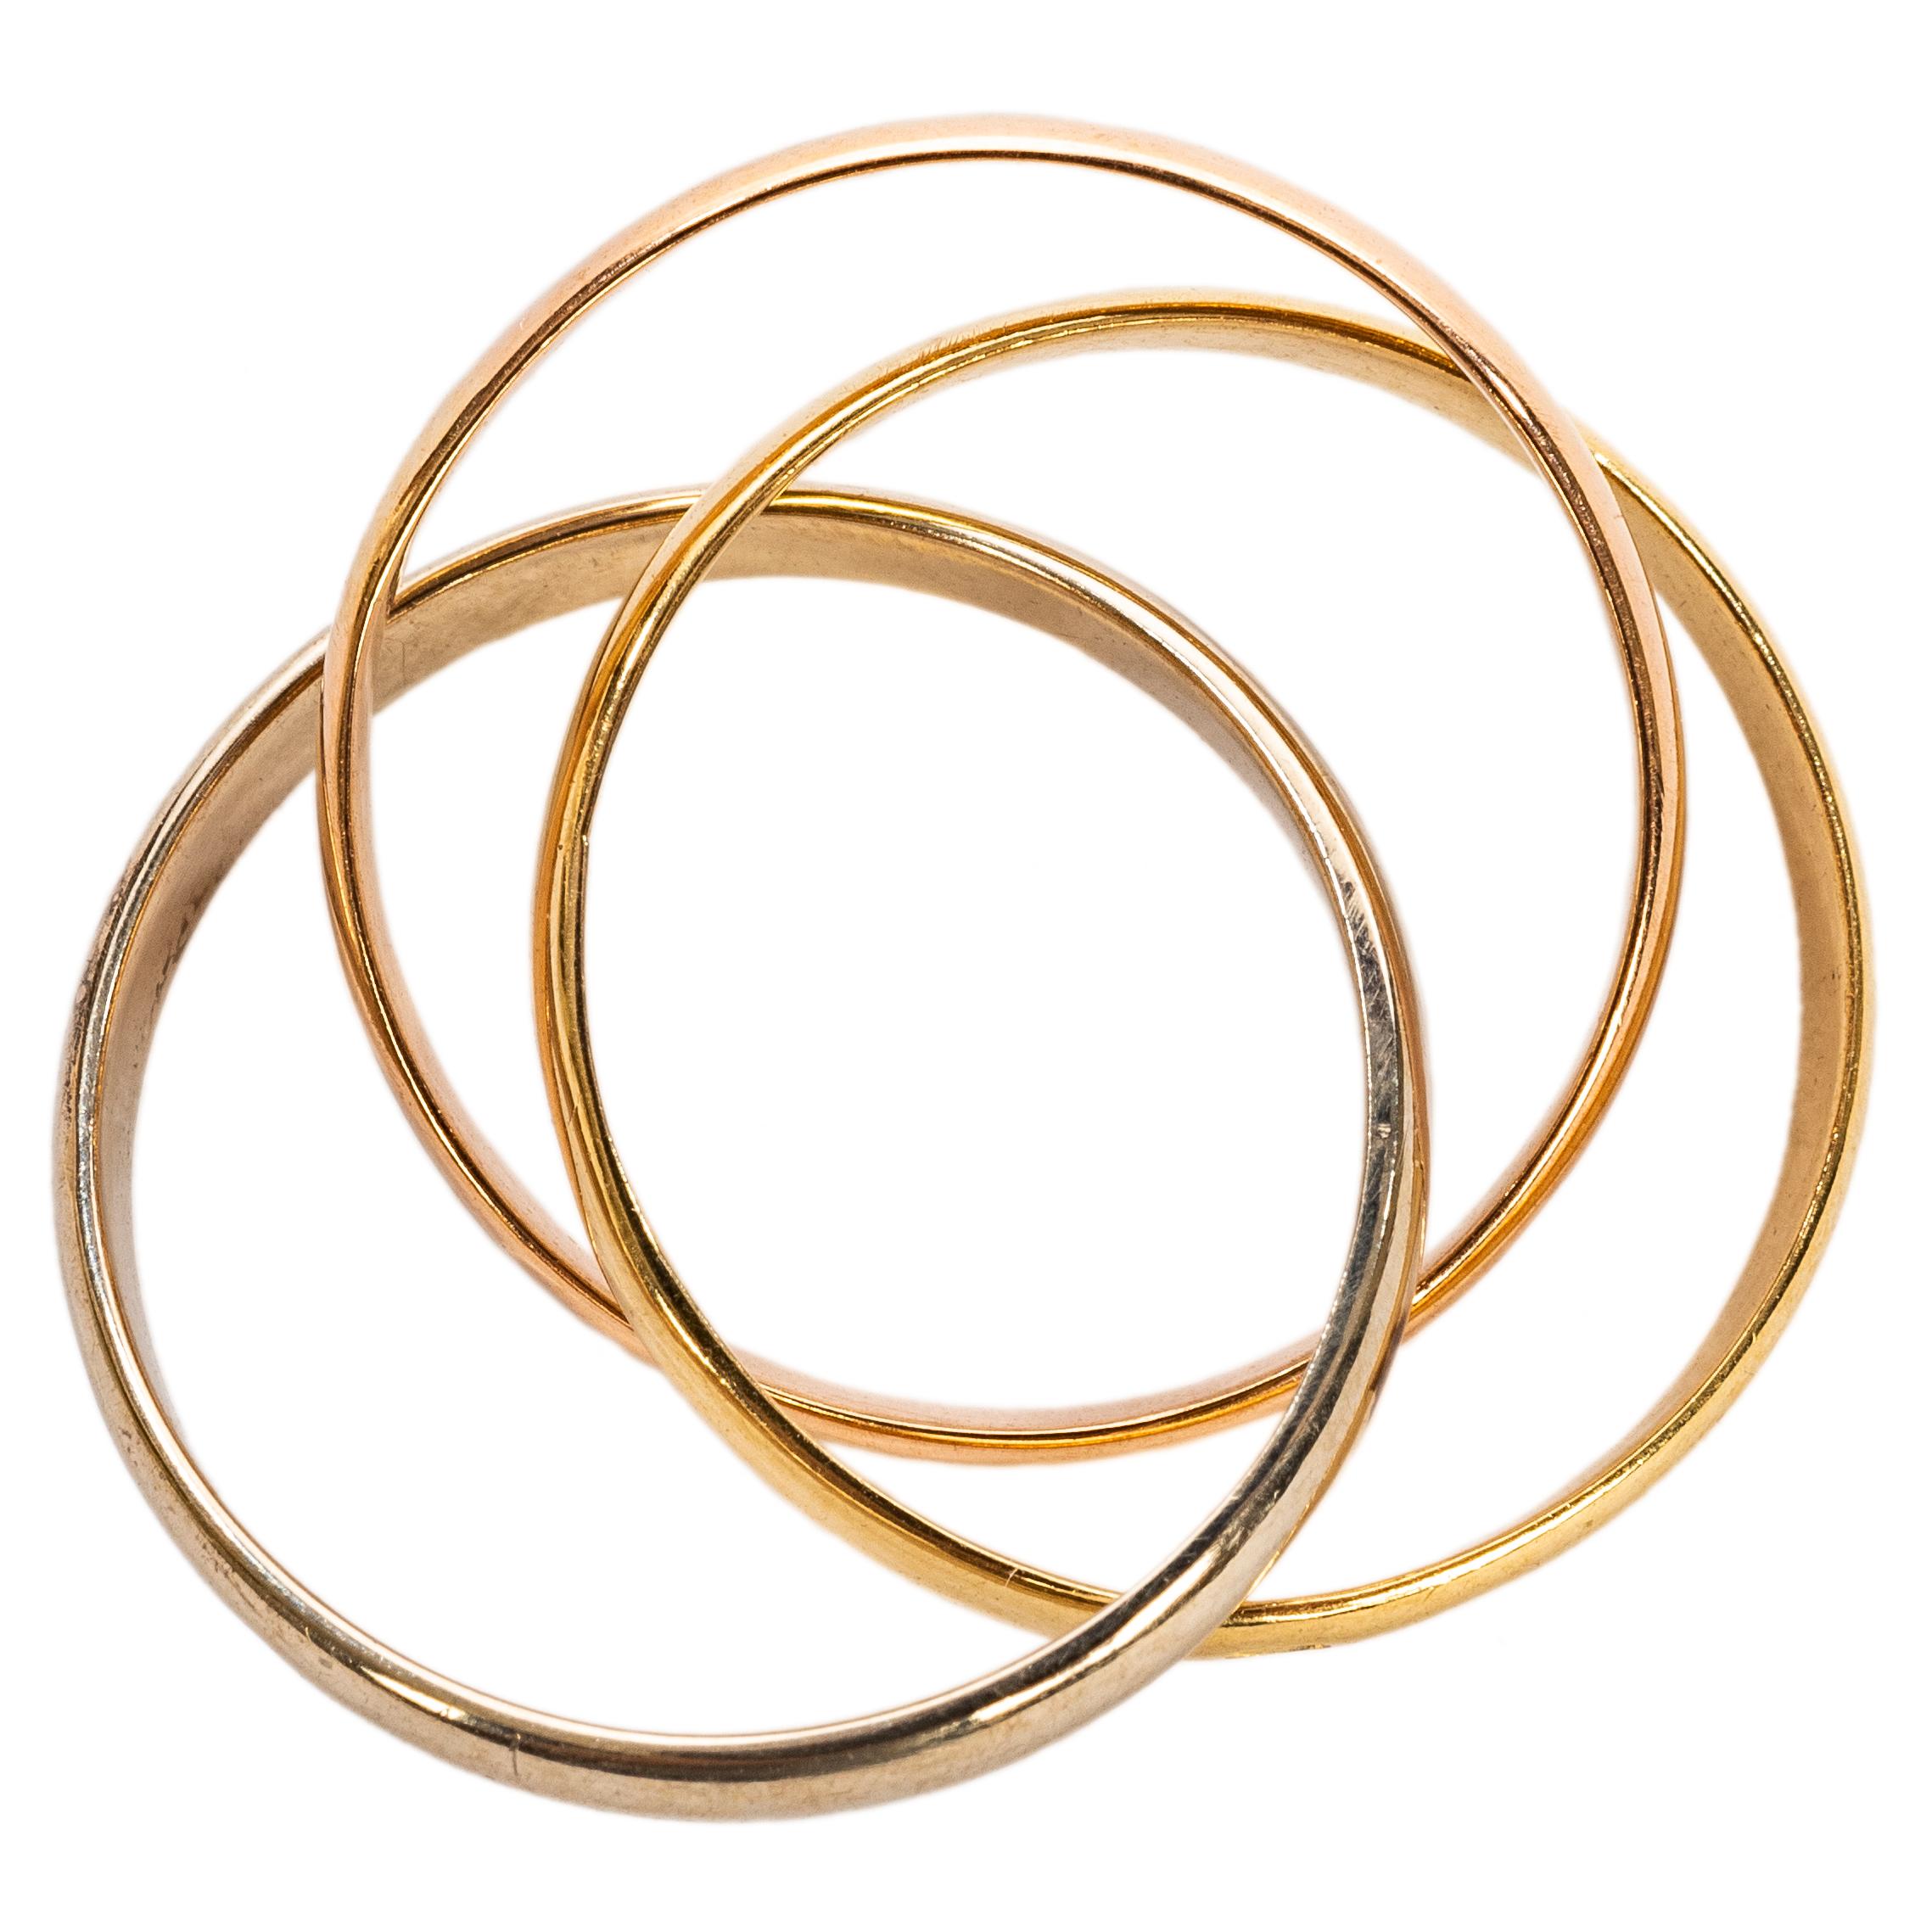 French triple band ring in three colors of 18k gold, 20th Century, of classic design, in 18k white gold, 18k rose gold and 18k yellow gold.

Bands measure 2.5 mm. Each band with French control mark.

Ring size 4 1/4. 

